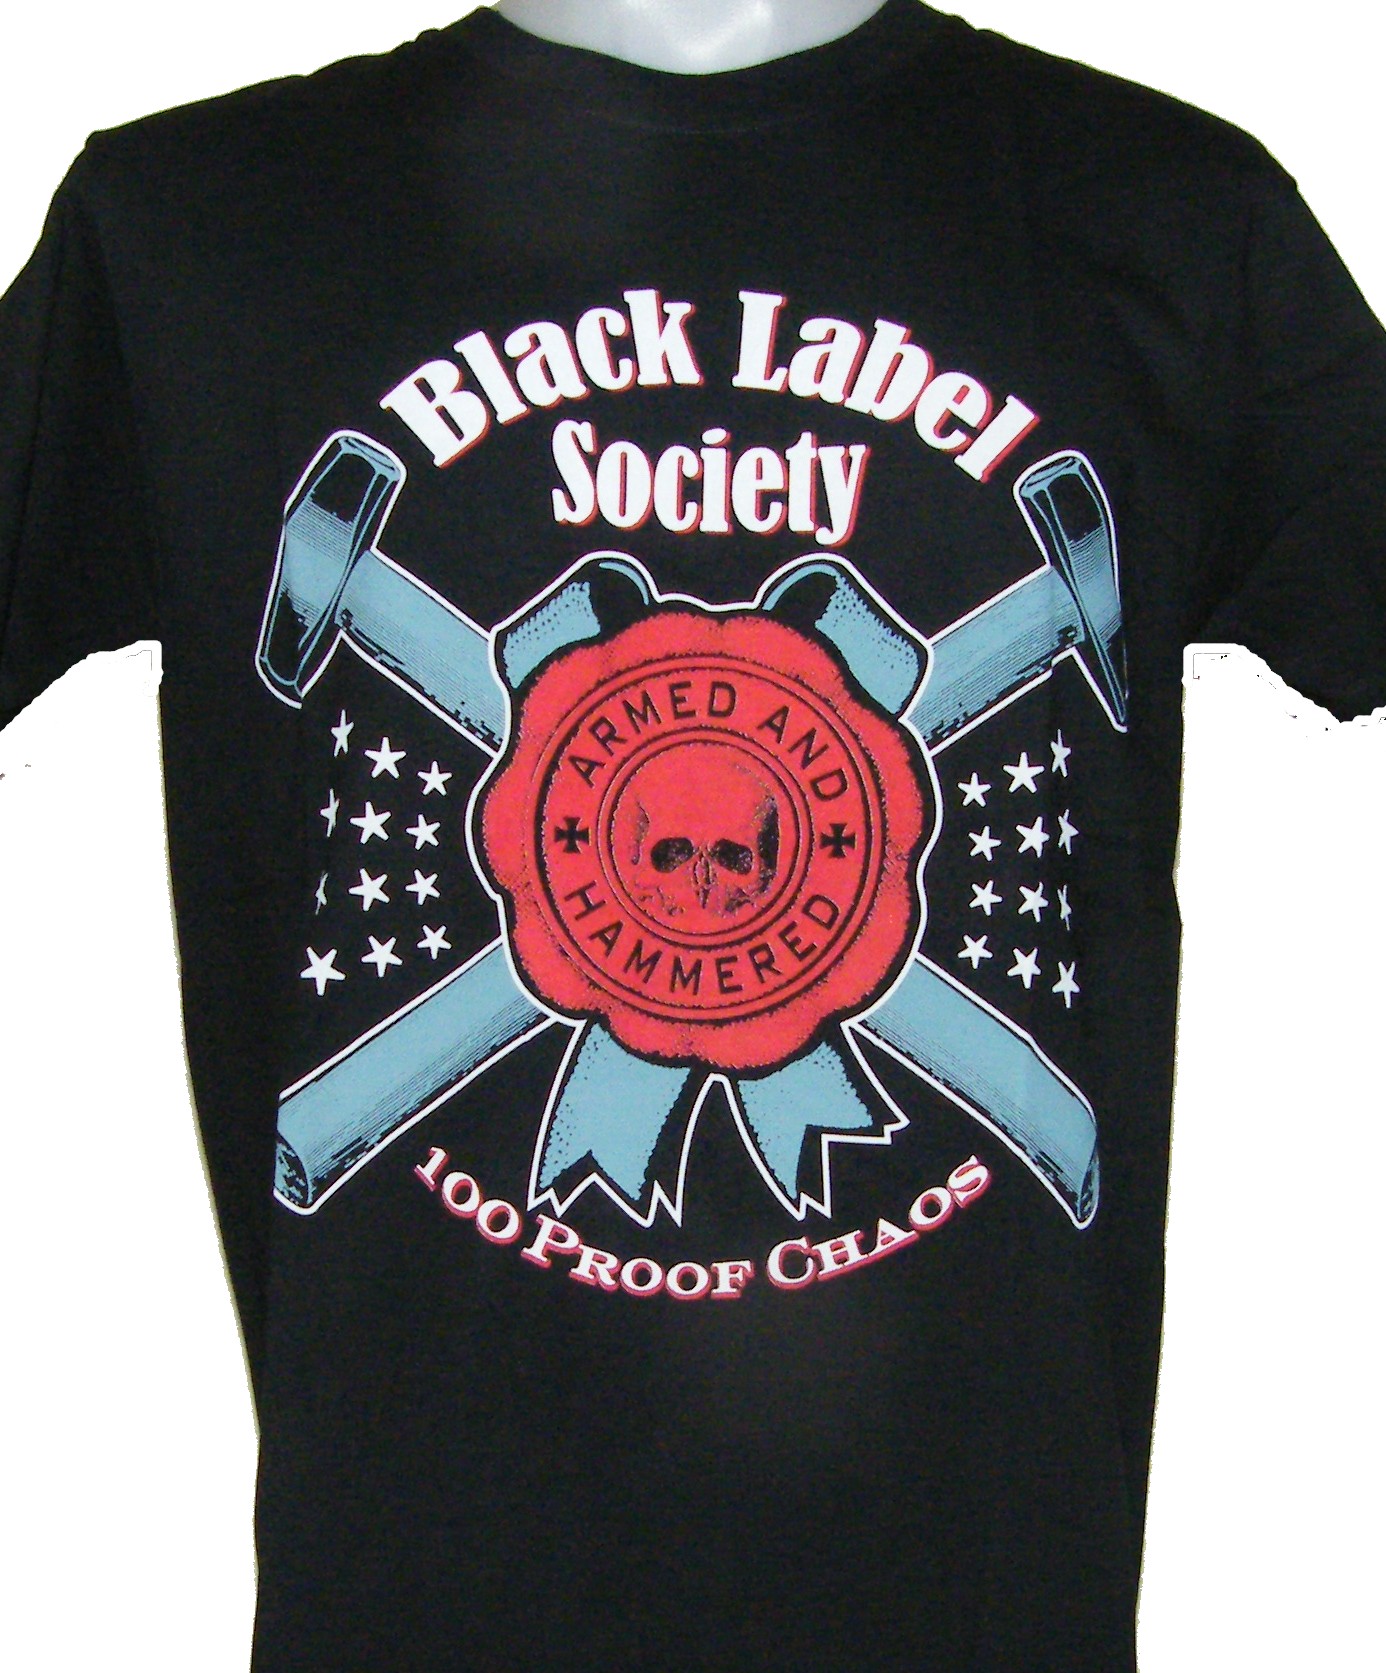 Black Label Society t-shirt Armed and Hammered size L